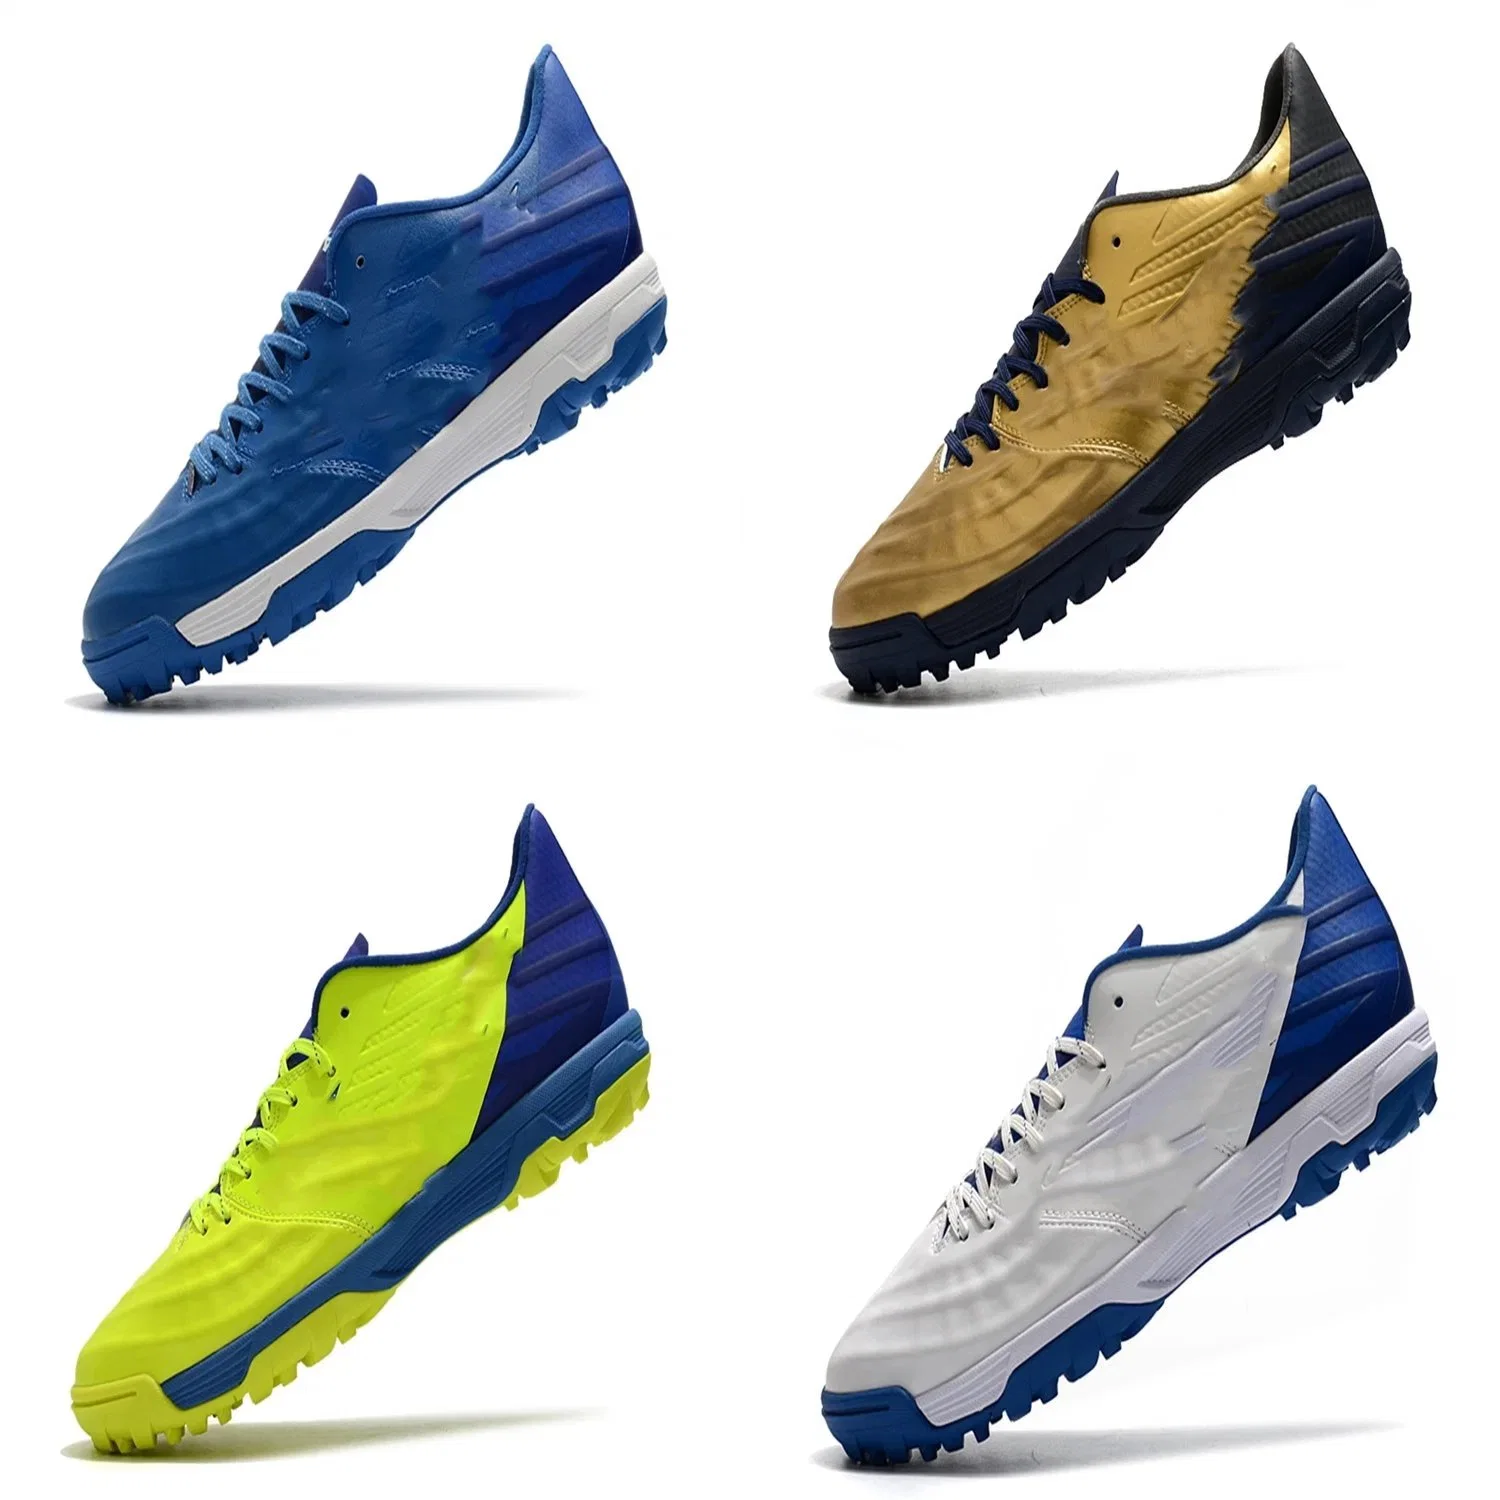 New Arrival! Sports Running Football Soccer Rebula 3 Leather Turf Putian Shoes Cleats Sneakers